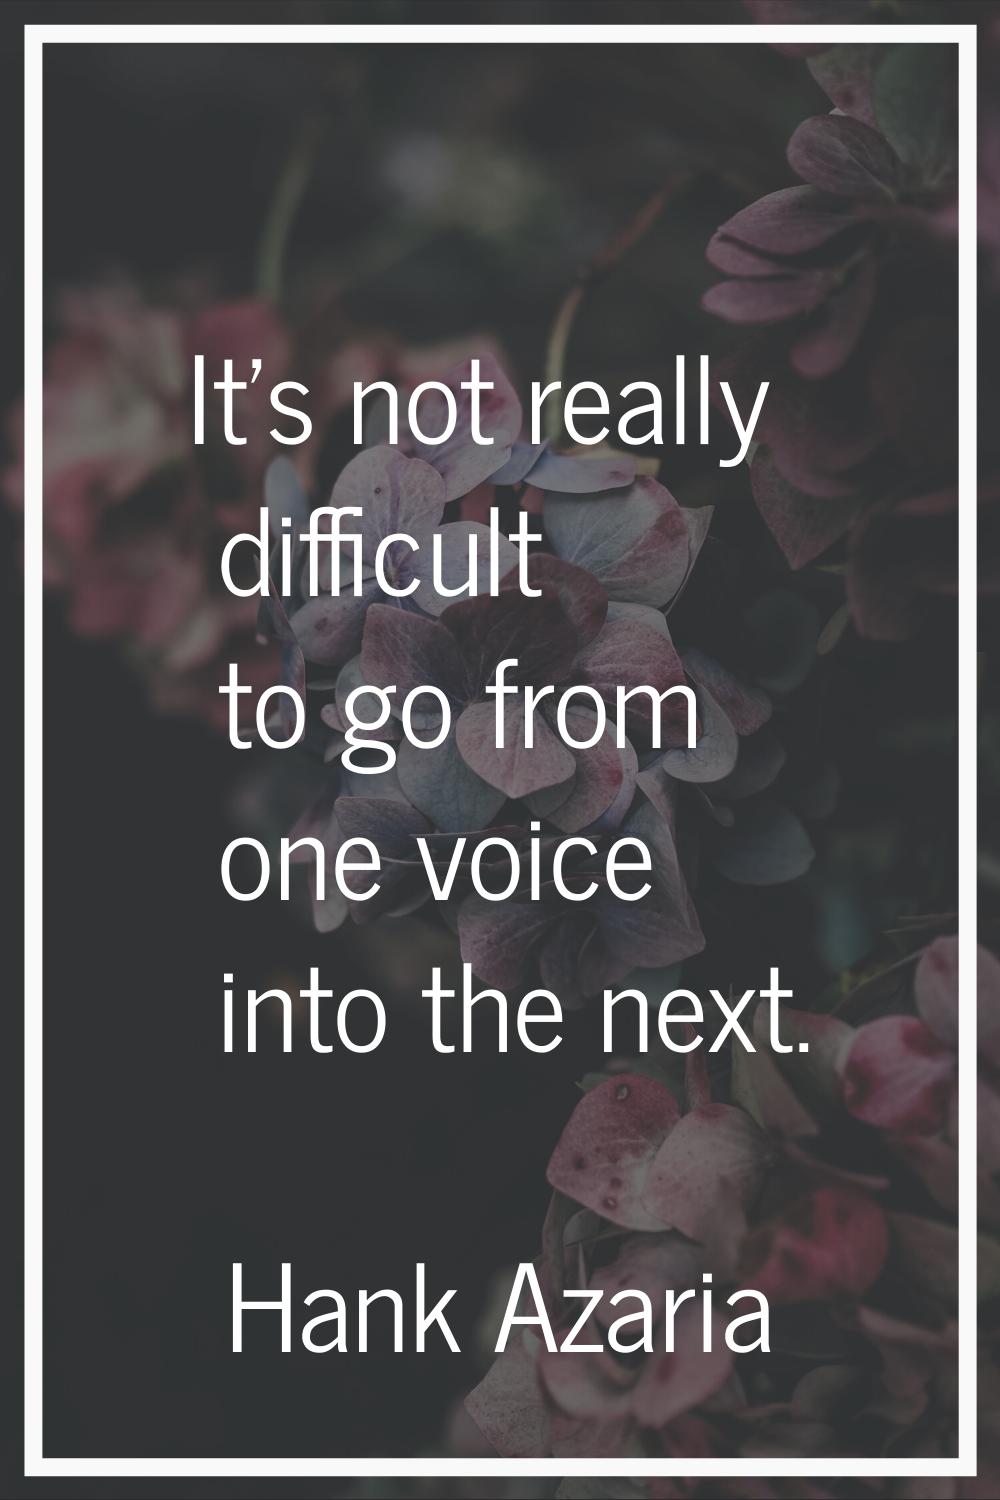 It's not really difficult to go from one voice into the next.